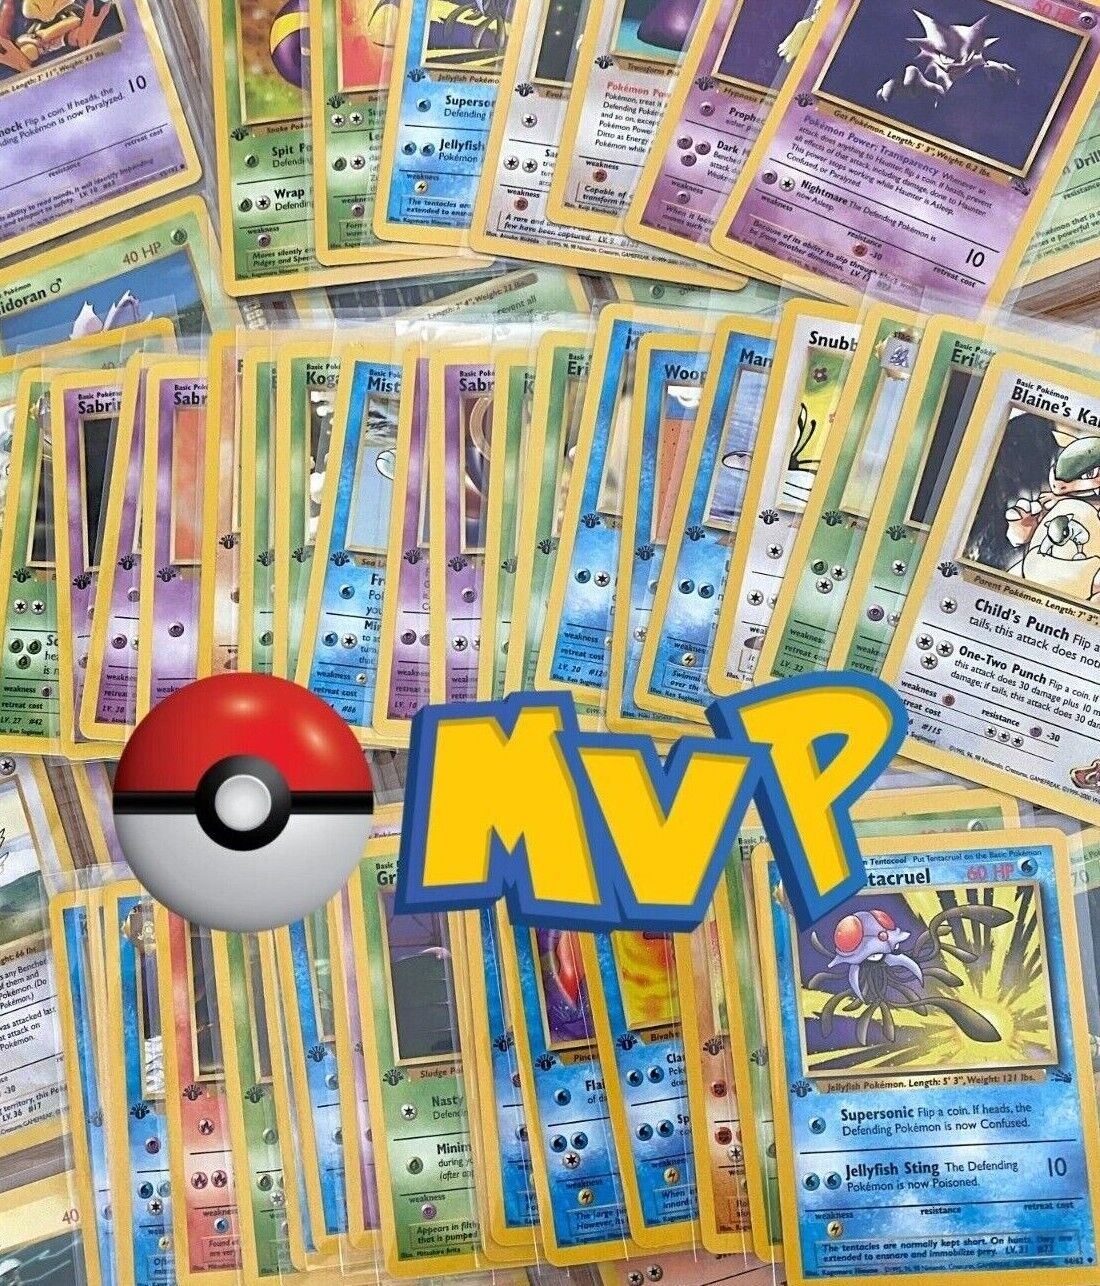 🔰 1st Edition Base Set Vintage Pokemon (12) Cards 100% WOTC Authentic FIRST NM Без бренда